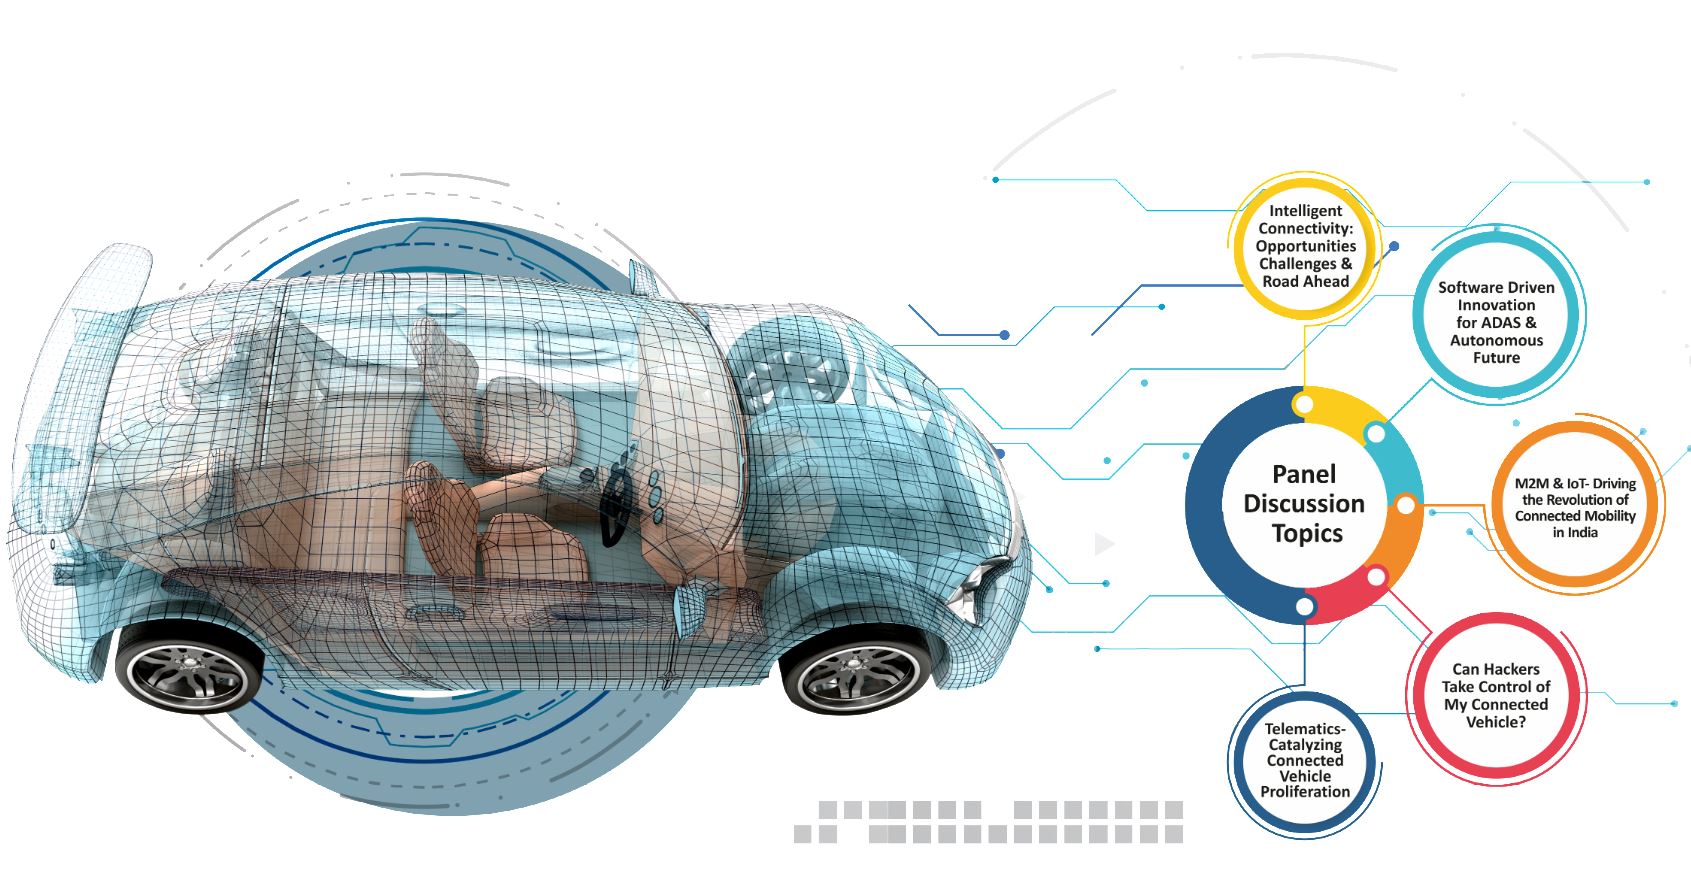 The latest technology in the automotive field - Connected Car Technology